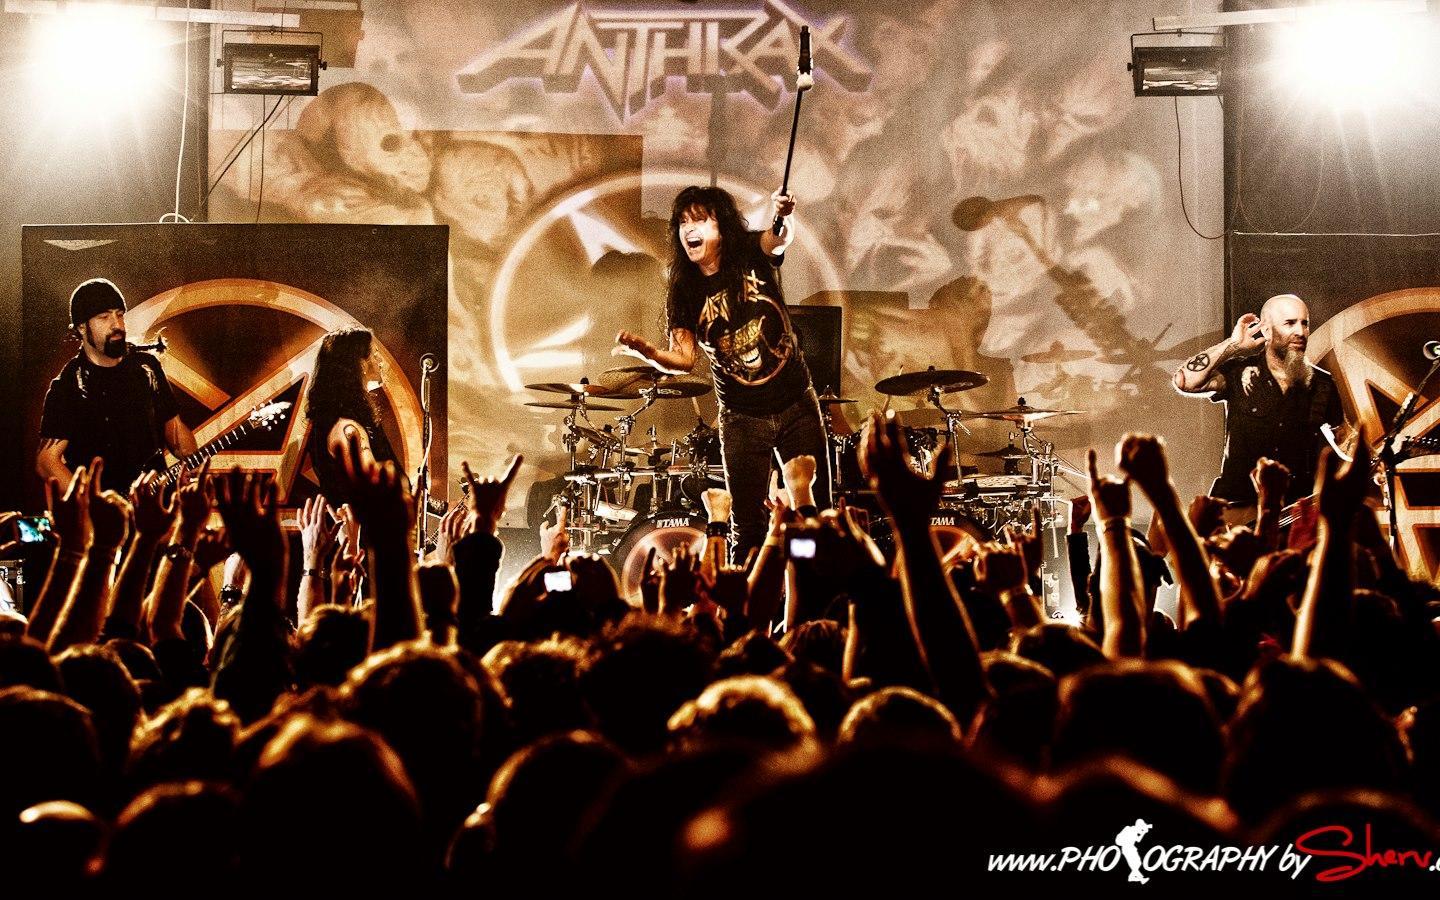 Anthrax  On this day in 1981 Happy birthday Anthrax  Facebook